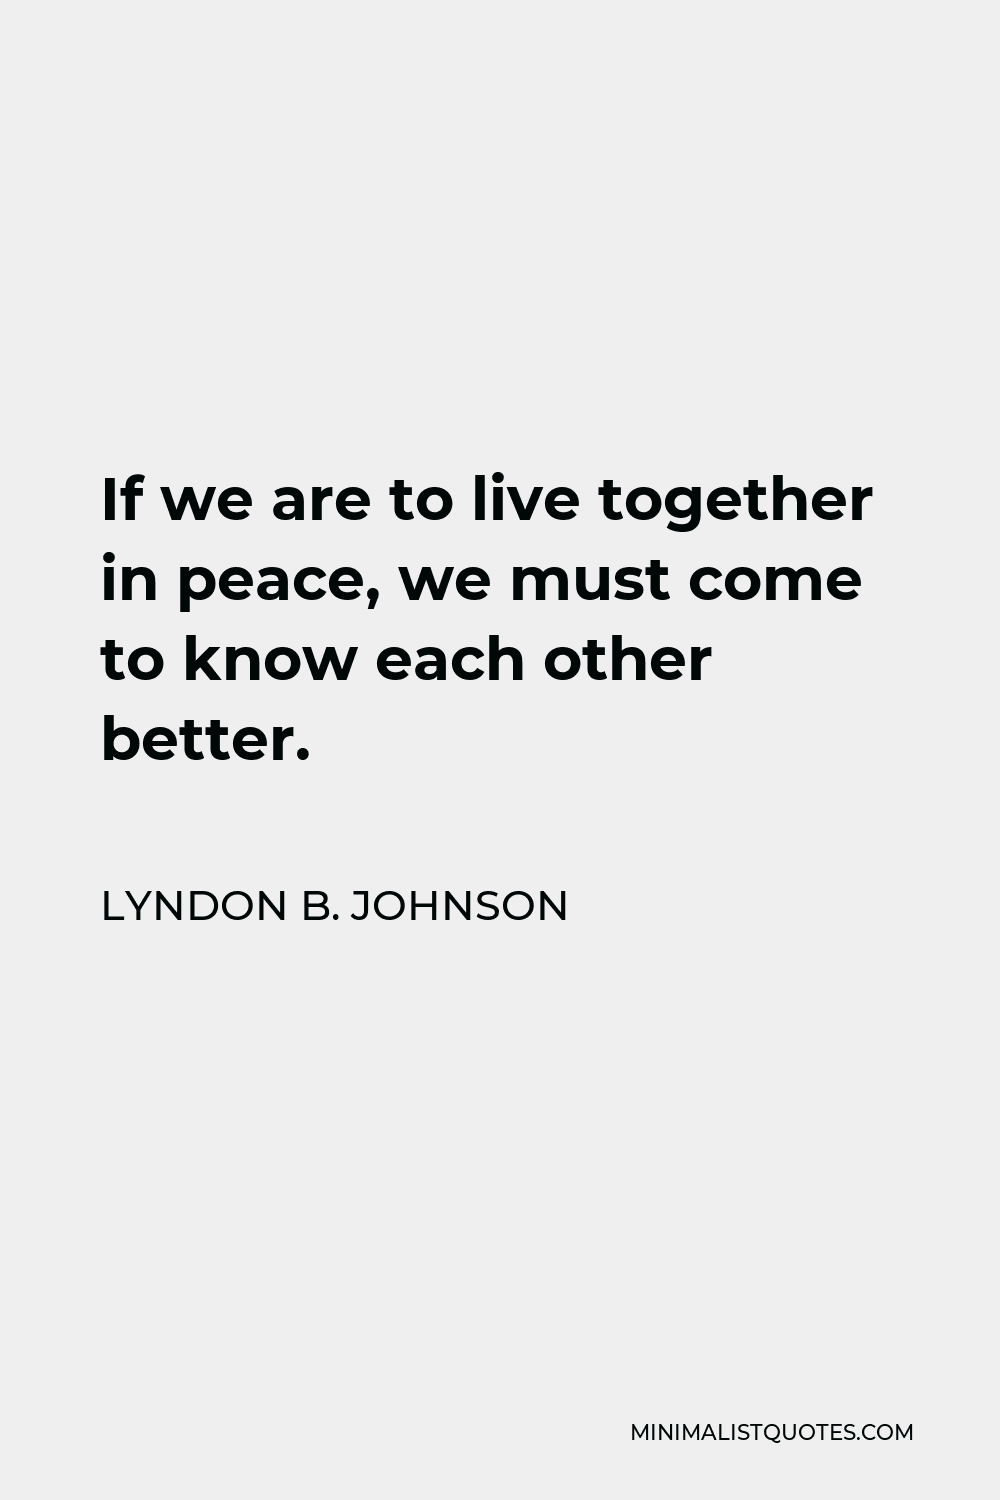 Lyndon B. Johnson Quote - If we are to live together in peace, we must come to know each other better.